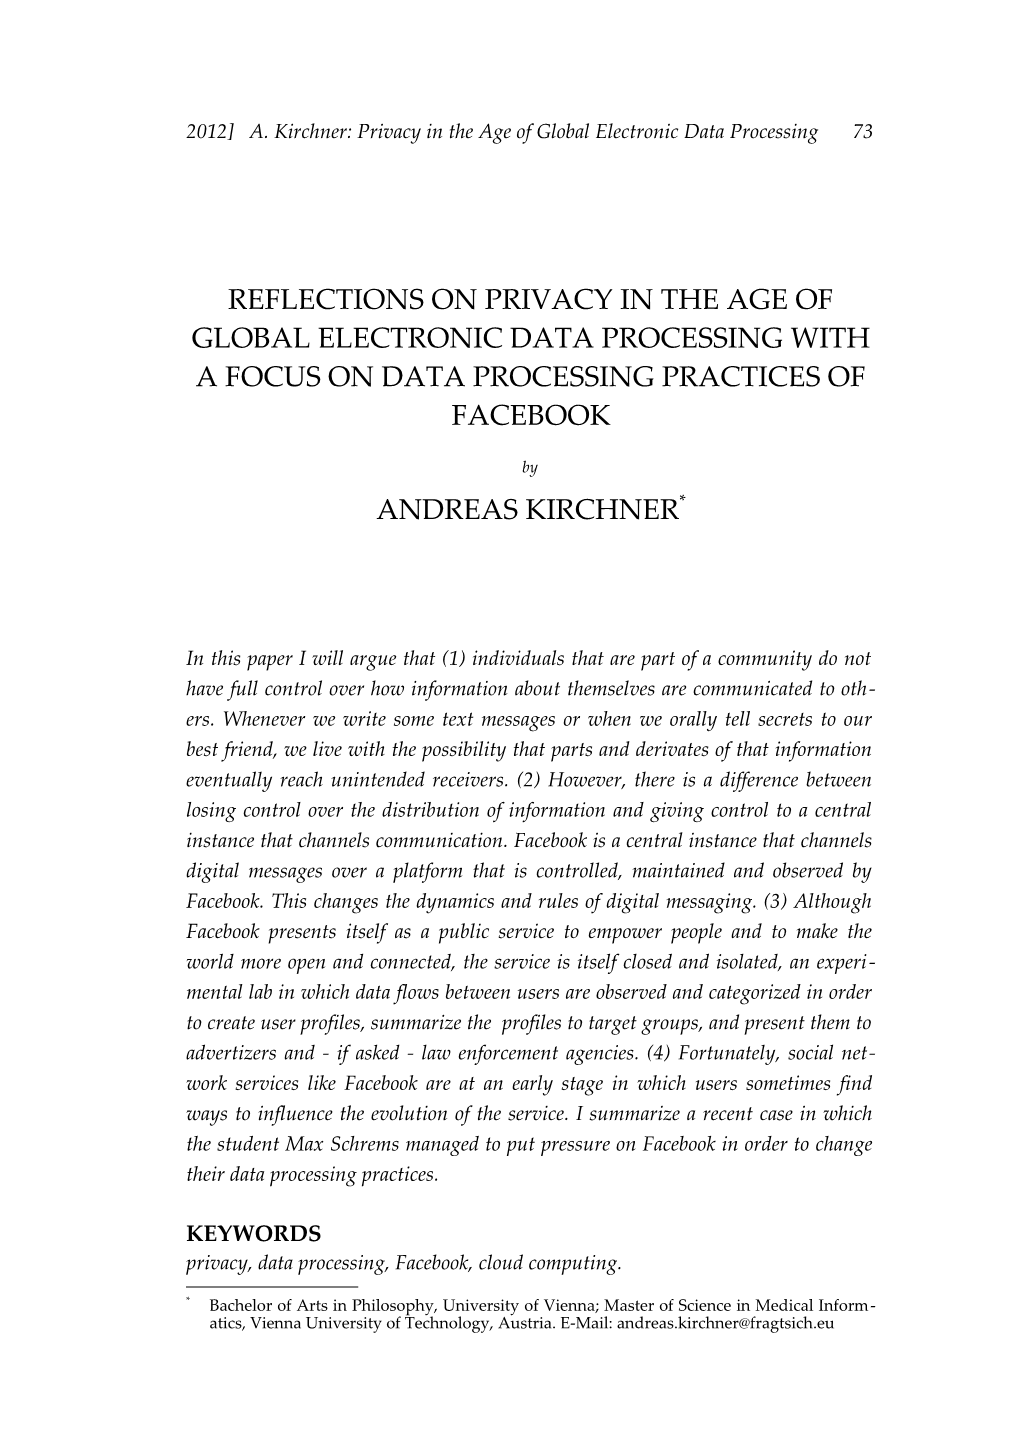 A. Kirchner: Privacy in the Age of Global Electronic Data Processing 73